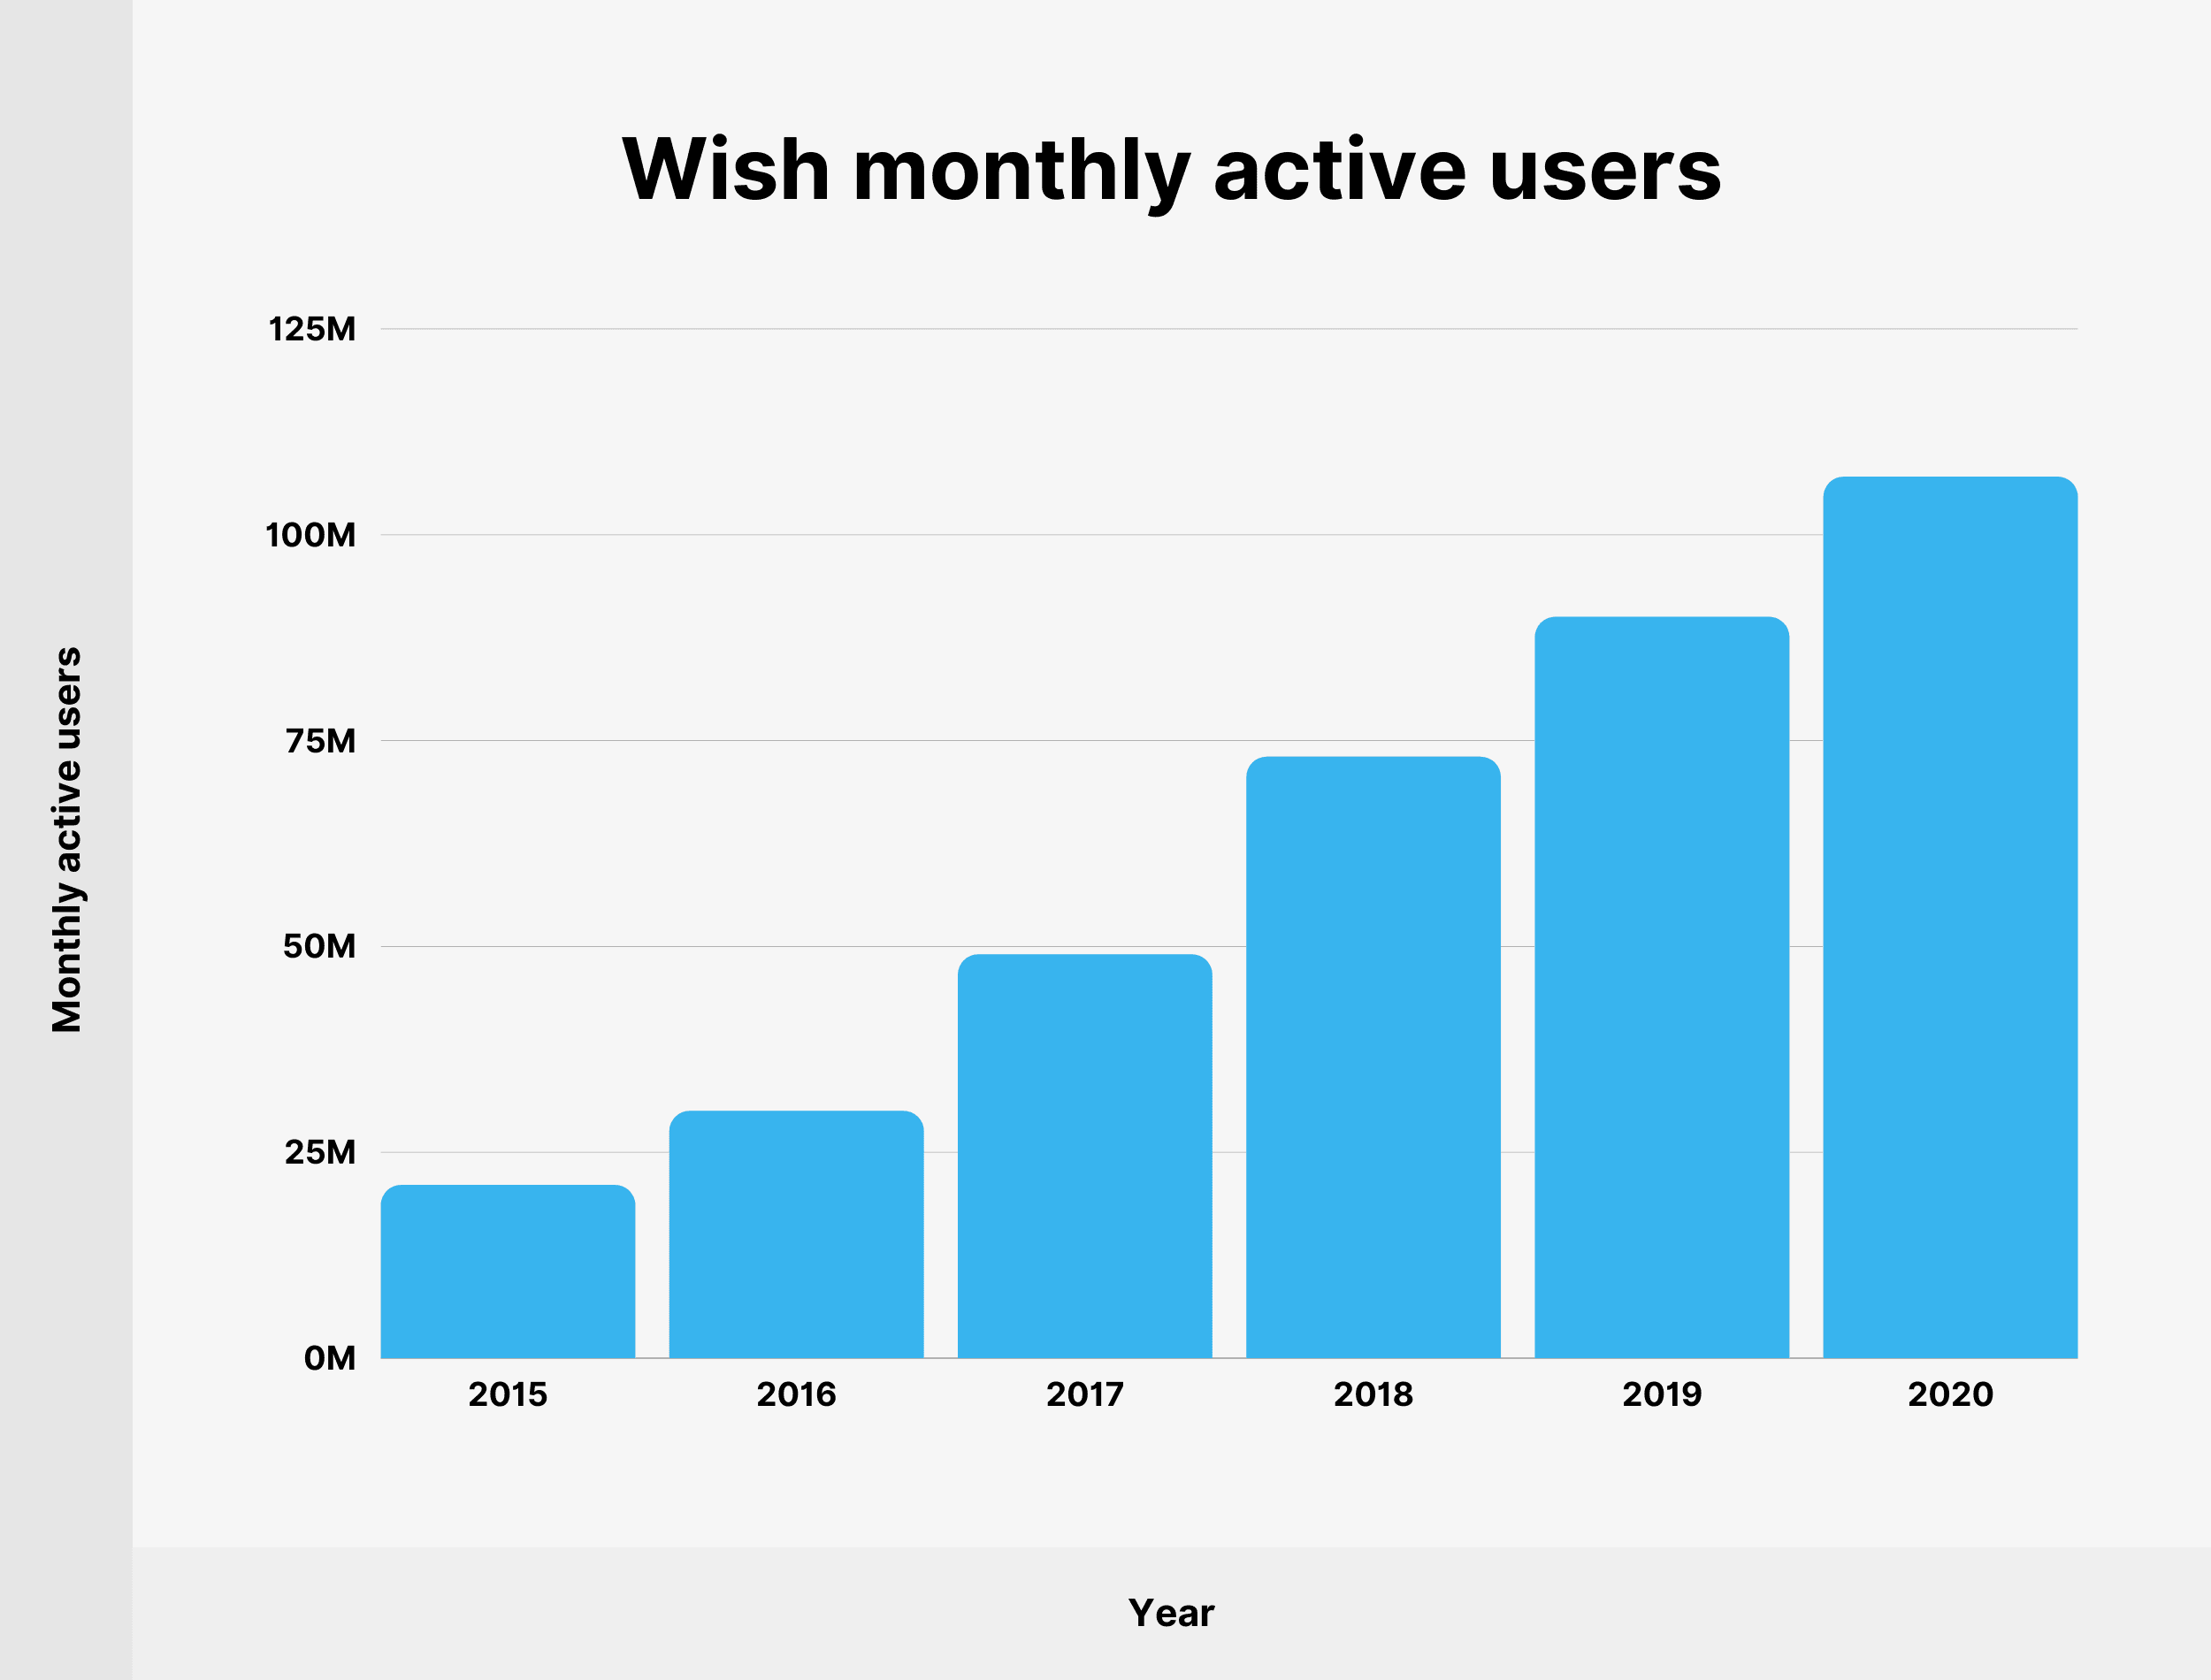 Wish monthly active user growth